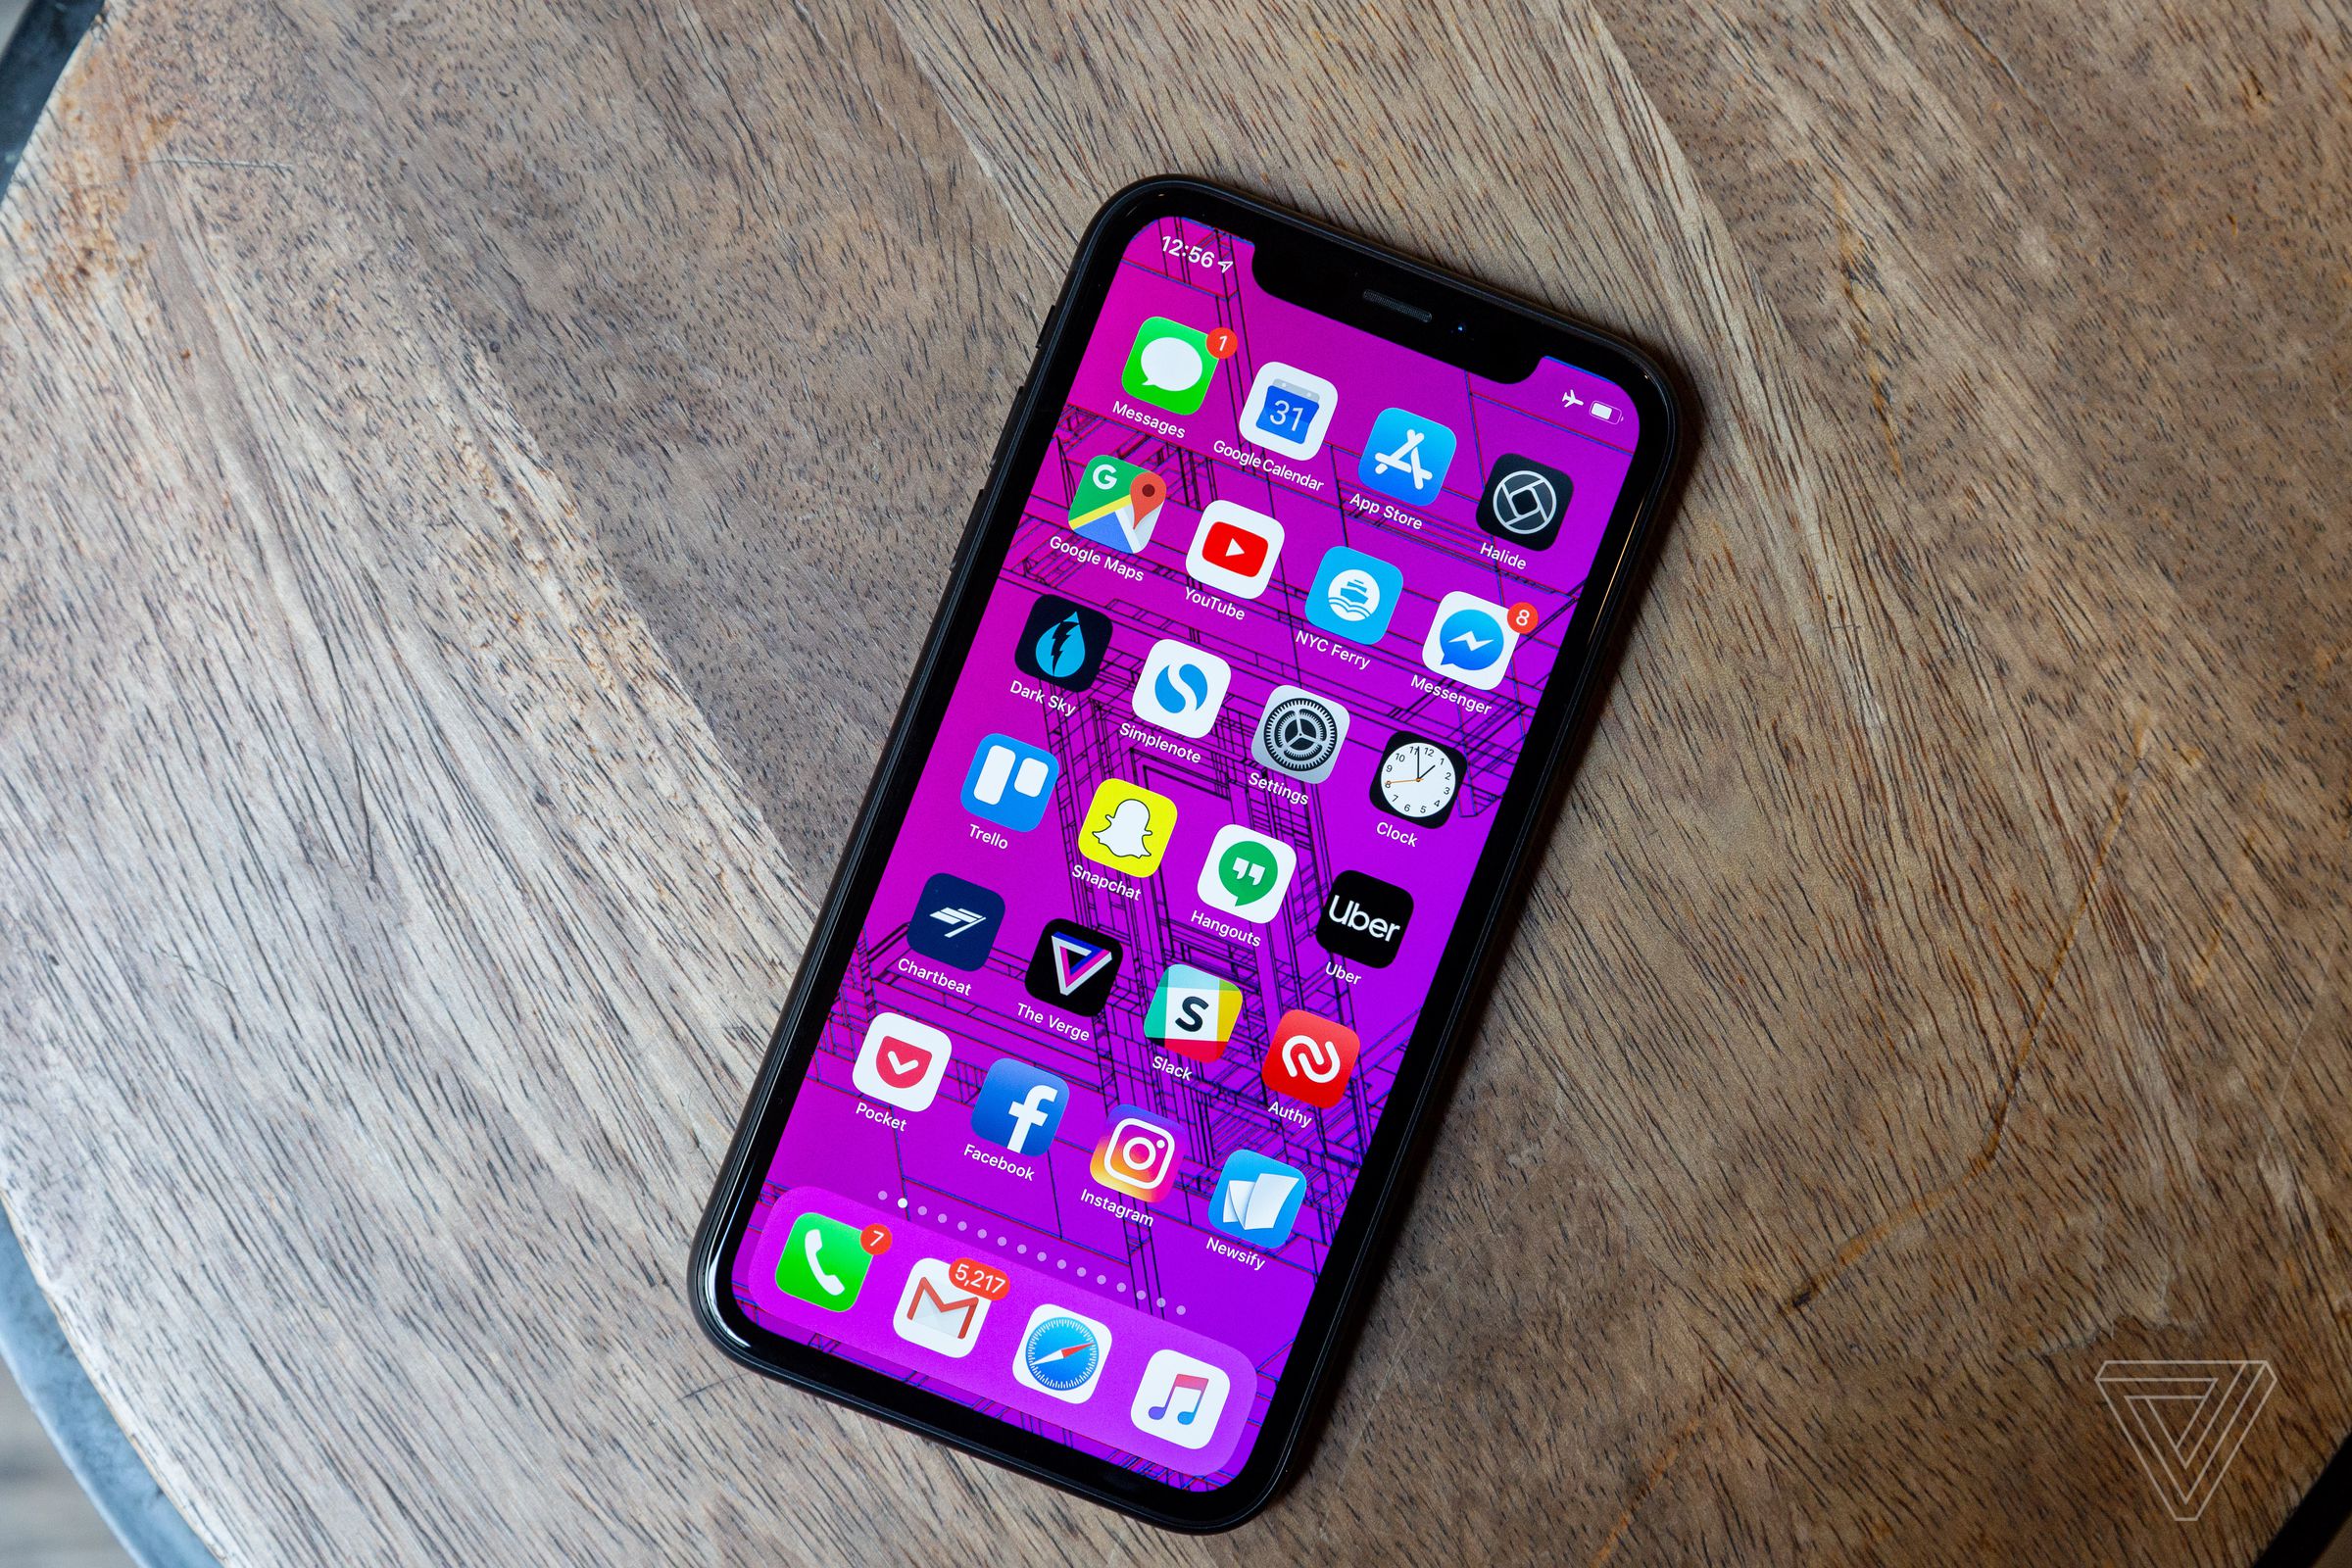 The iPhone XR is proof that there’s an appetite for bigger budget phones.